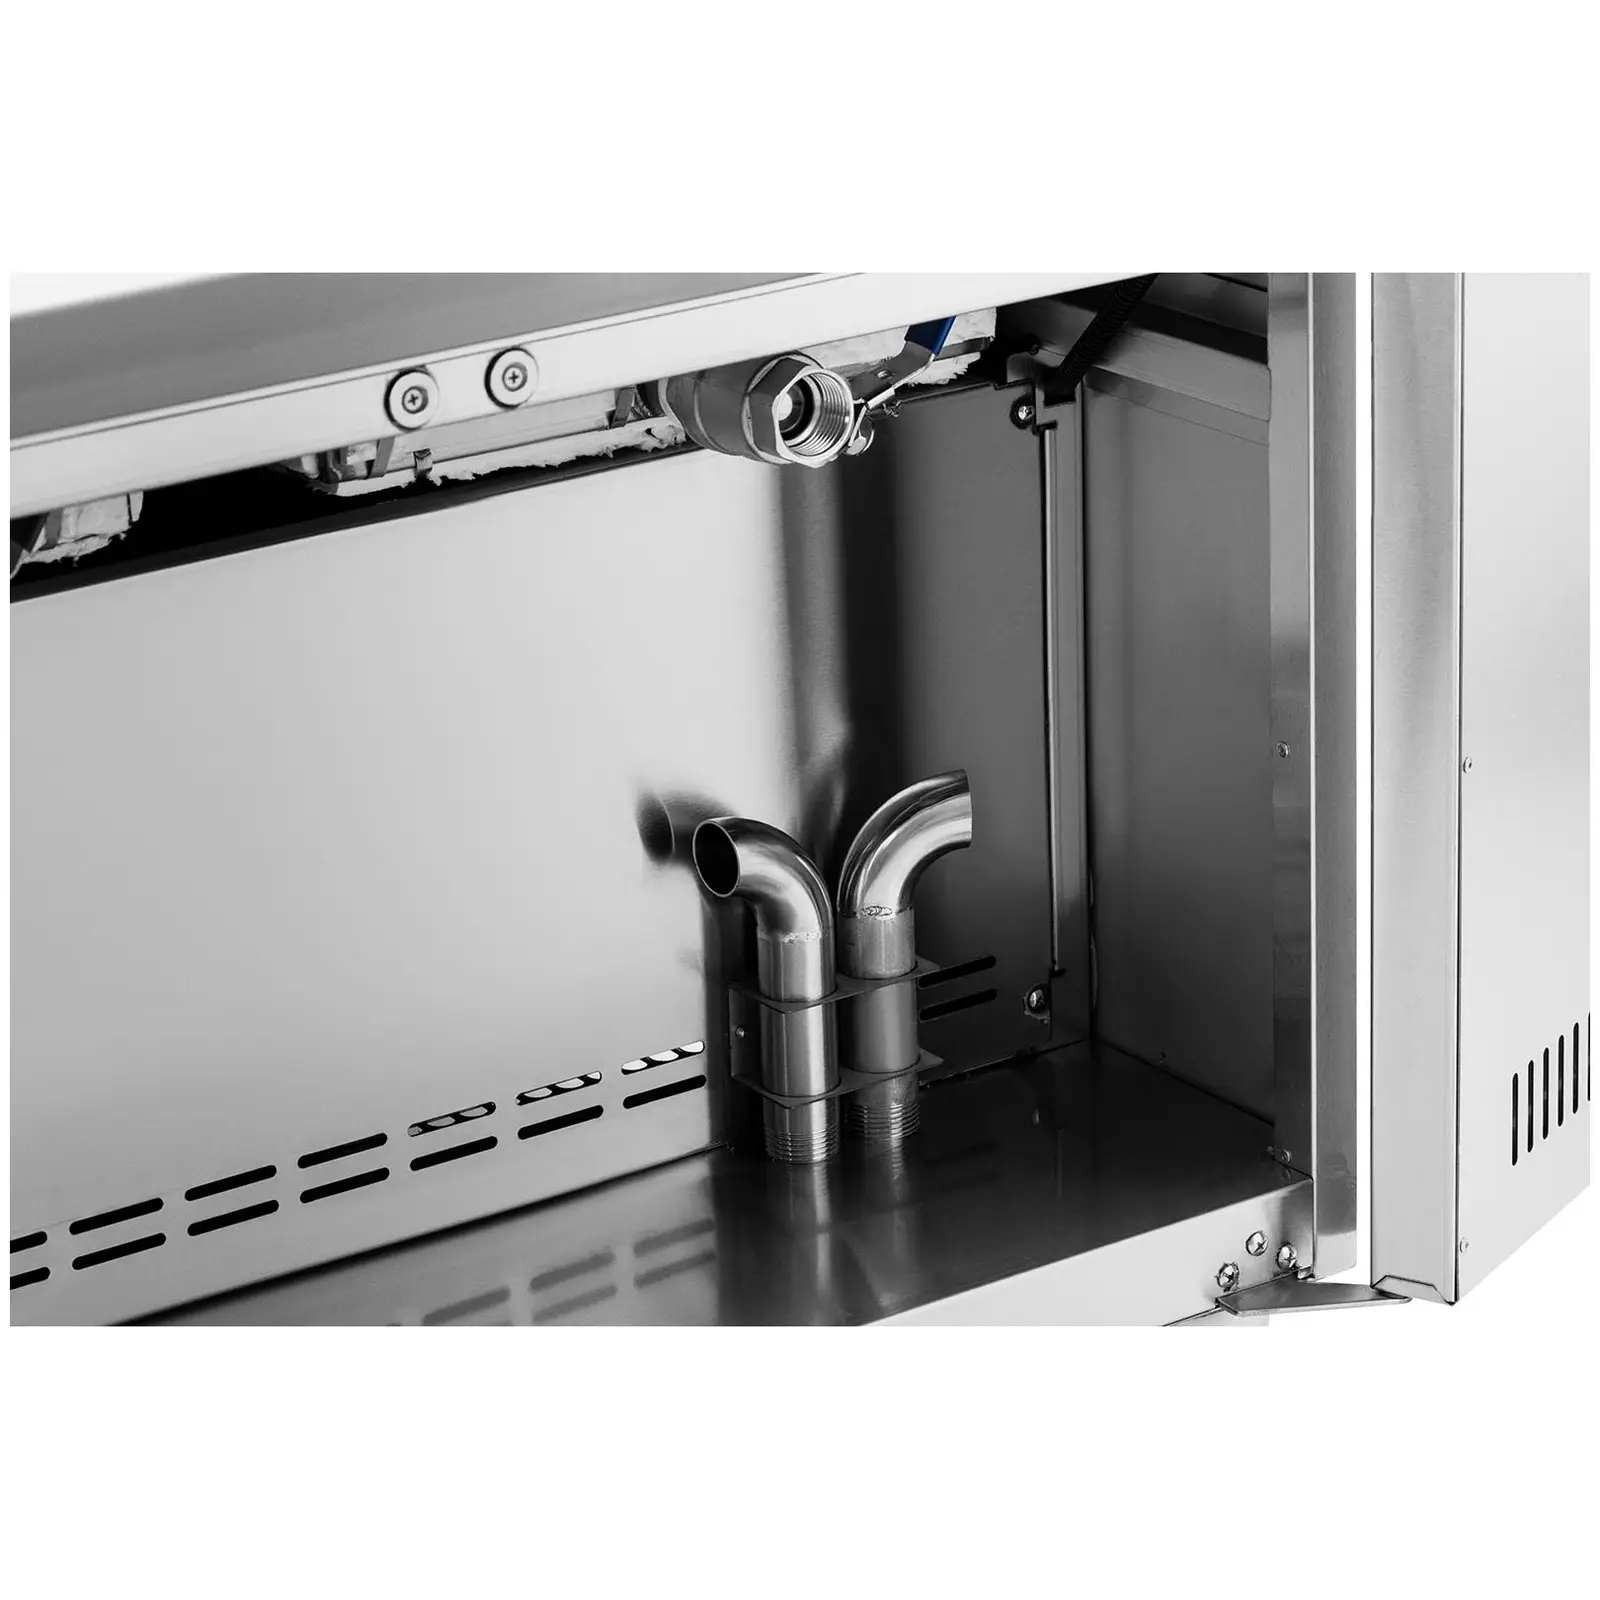 Induktionsfritteuse - 2 x 30 L - 60 bis 190 °C - Royal Catering